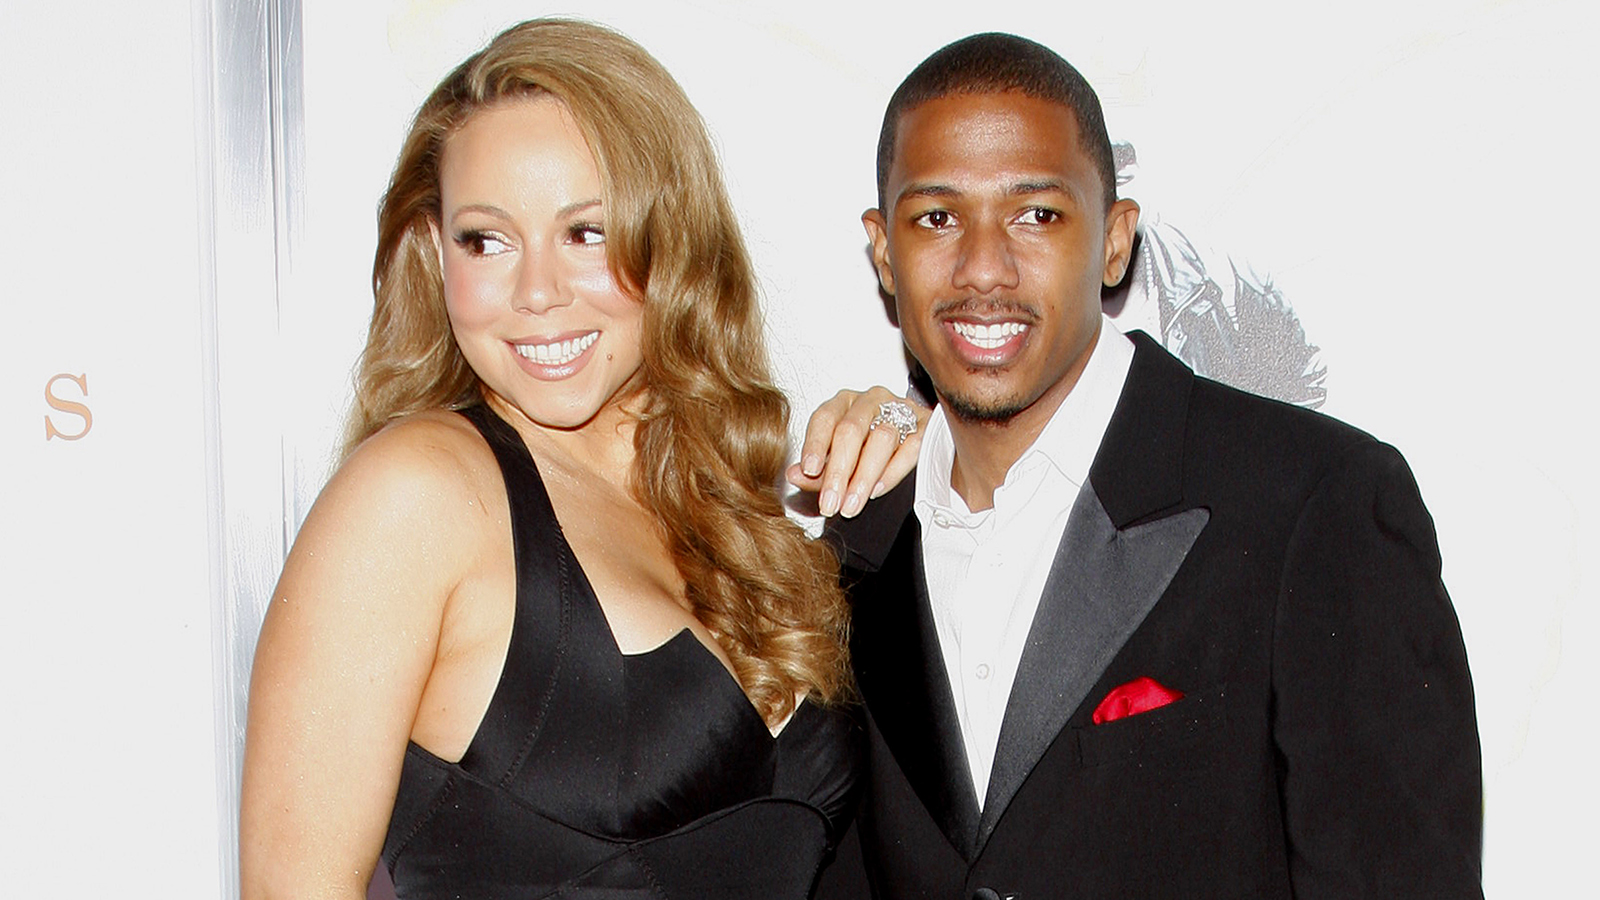 Mariah Carey and Nick Cannon at the AFI FEST 2009 Screening of "Precious" held at the Grauman's Chinese Theater in Hollywood, California, United States on November 1, 2009.